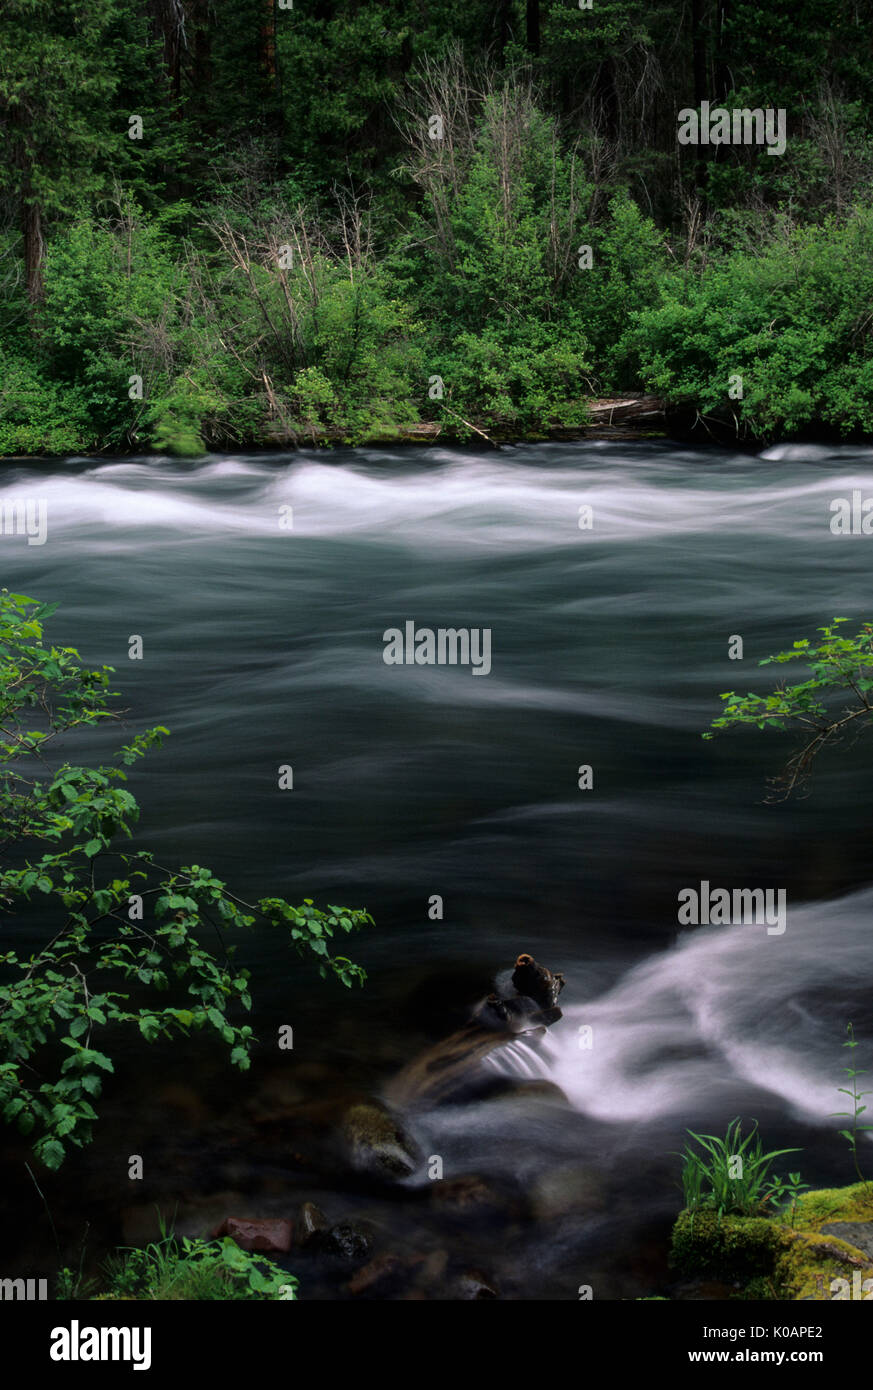 Metolius Wild and Scenic River, Deschutes National Forest, Oregon Stock Photo